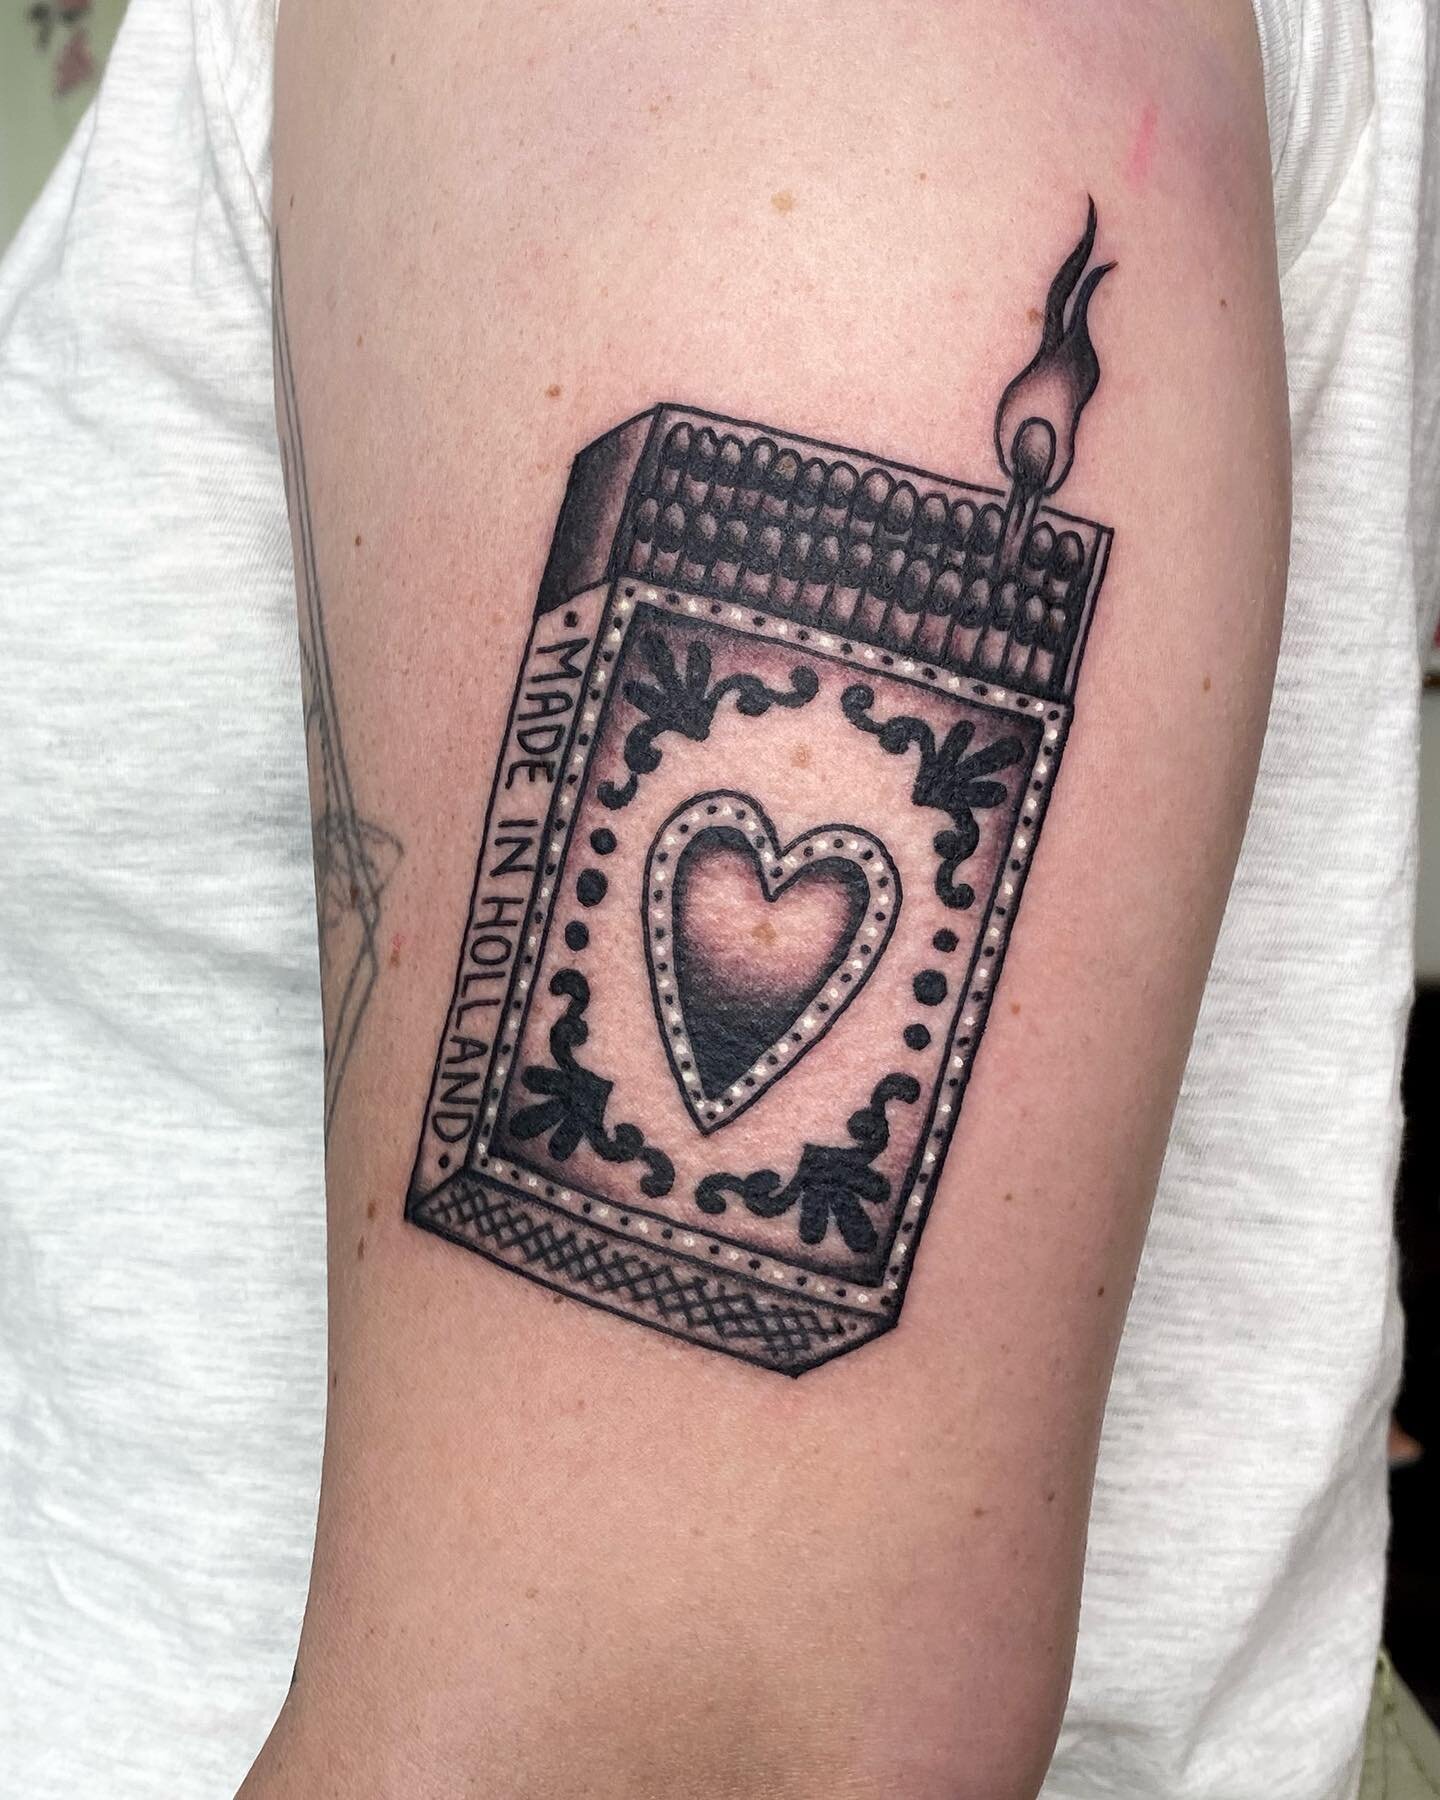 One of the matching match box 🔥 
Thank you J&amp;L!  Done at Black Rabbit Studio, Langley.

Today Sunday, find me doing flash day along @rempetattoo at @36thstreettattoo 🥳🥳🥳